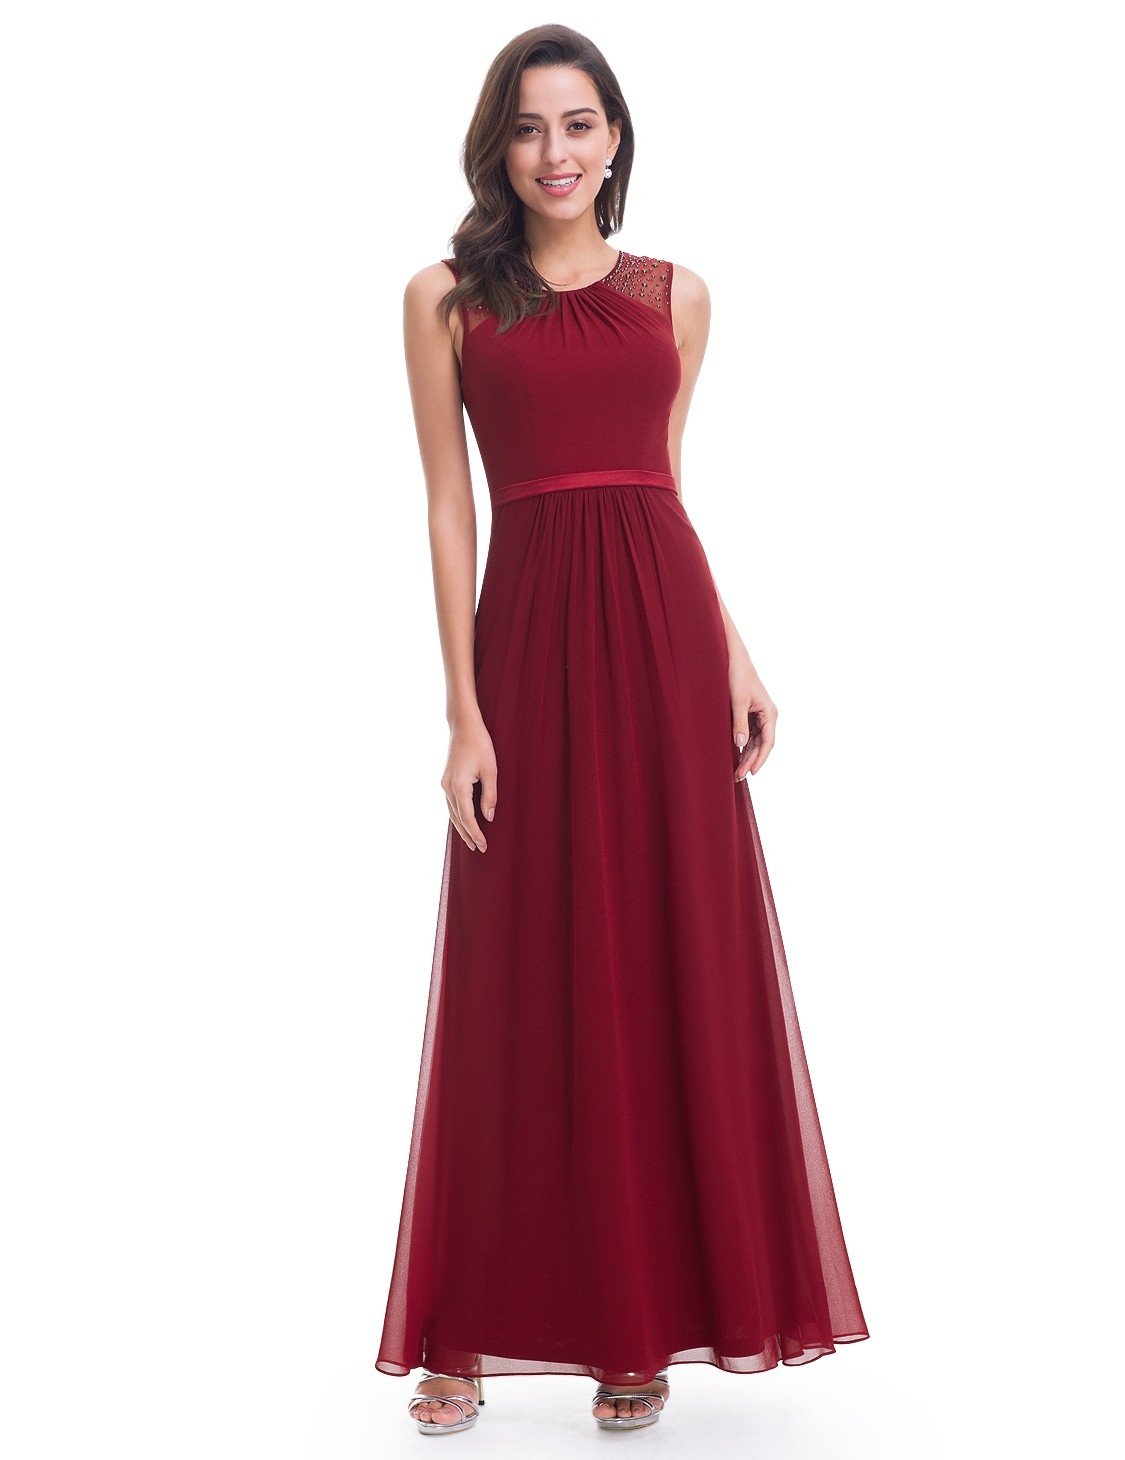 Red Bridesmaid Dress Style Guide - Ever-Pretty US